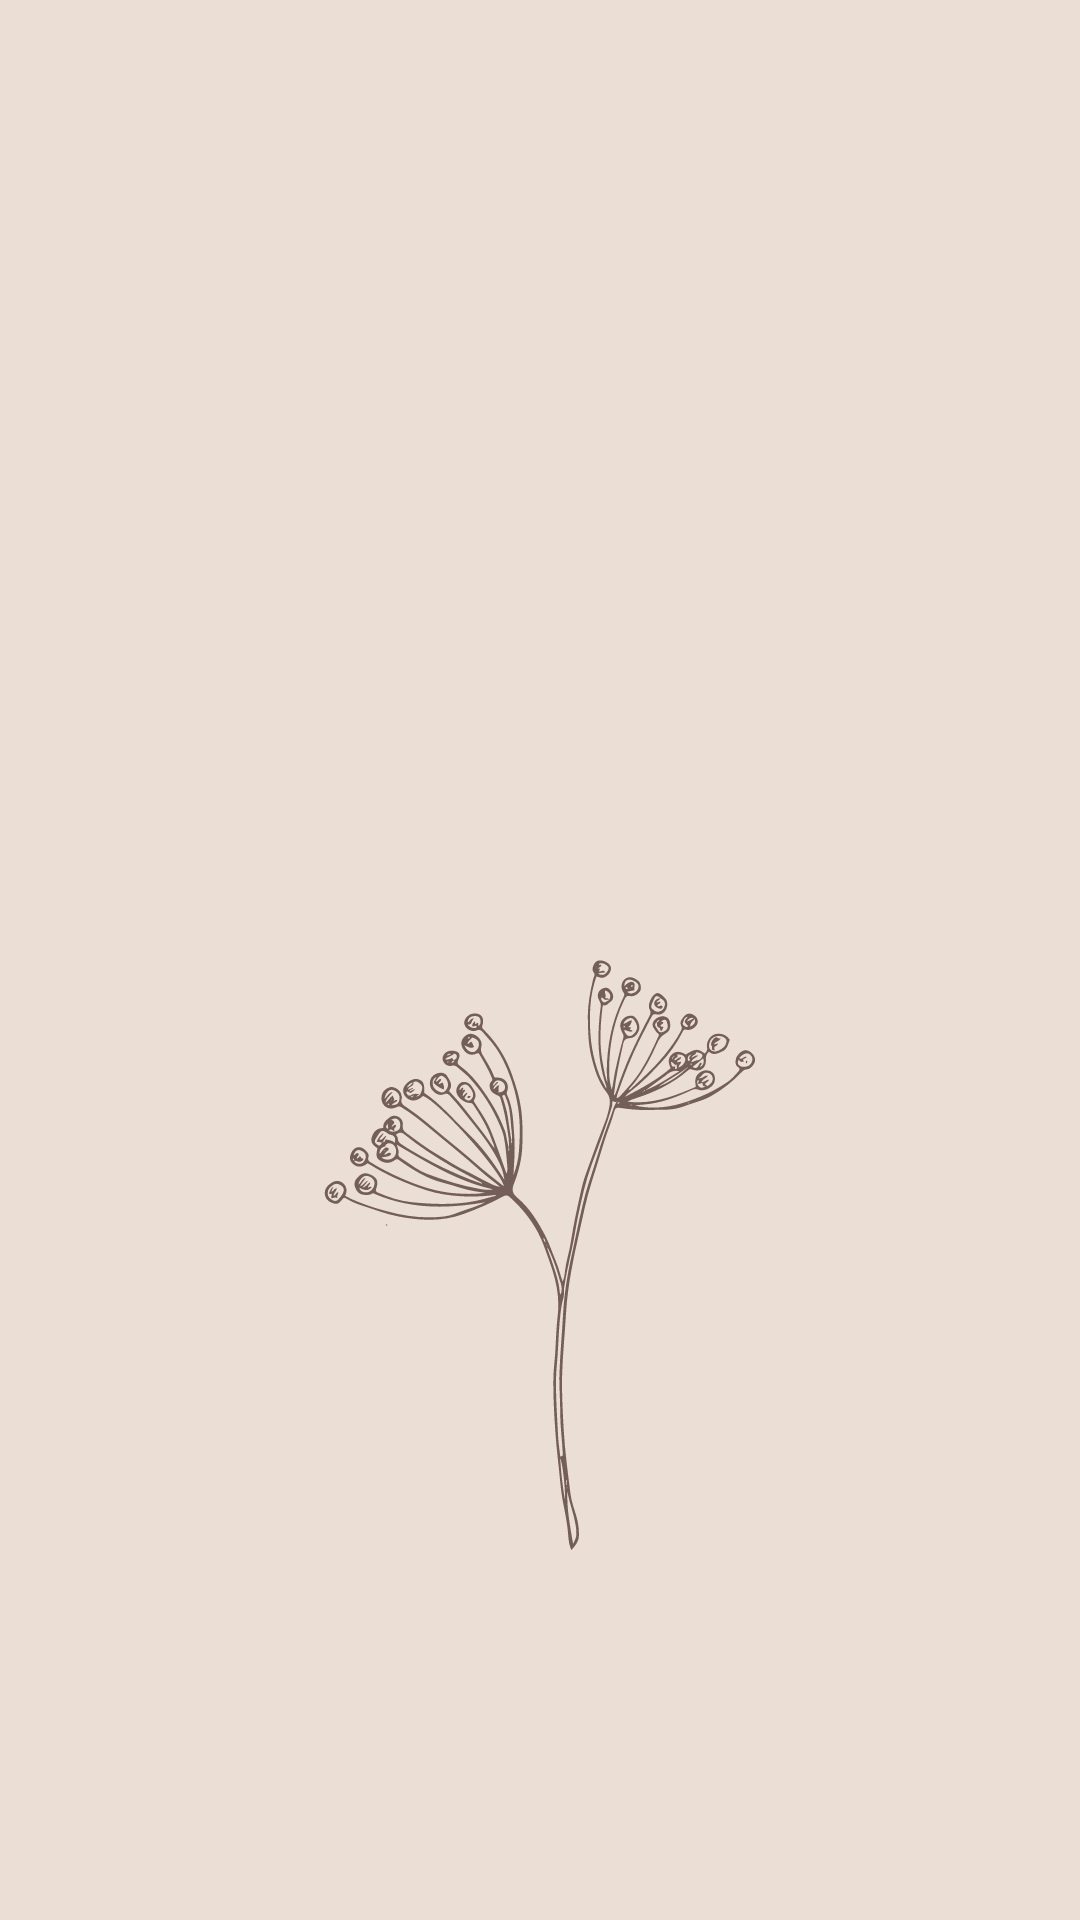 A black and white illustration of two flowers on a light brown background - Minimalist, spring